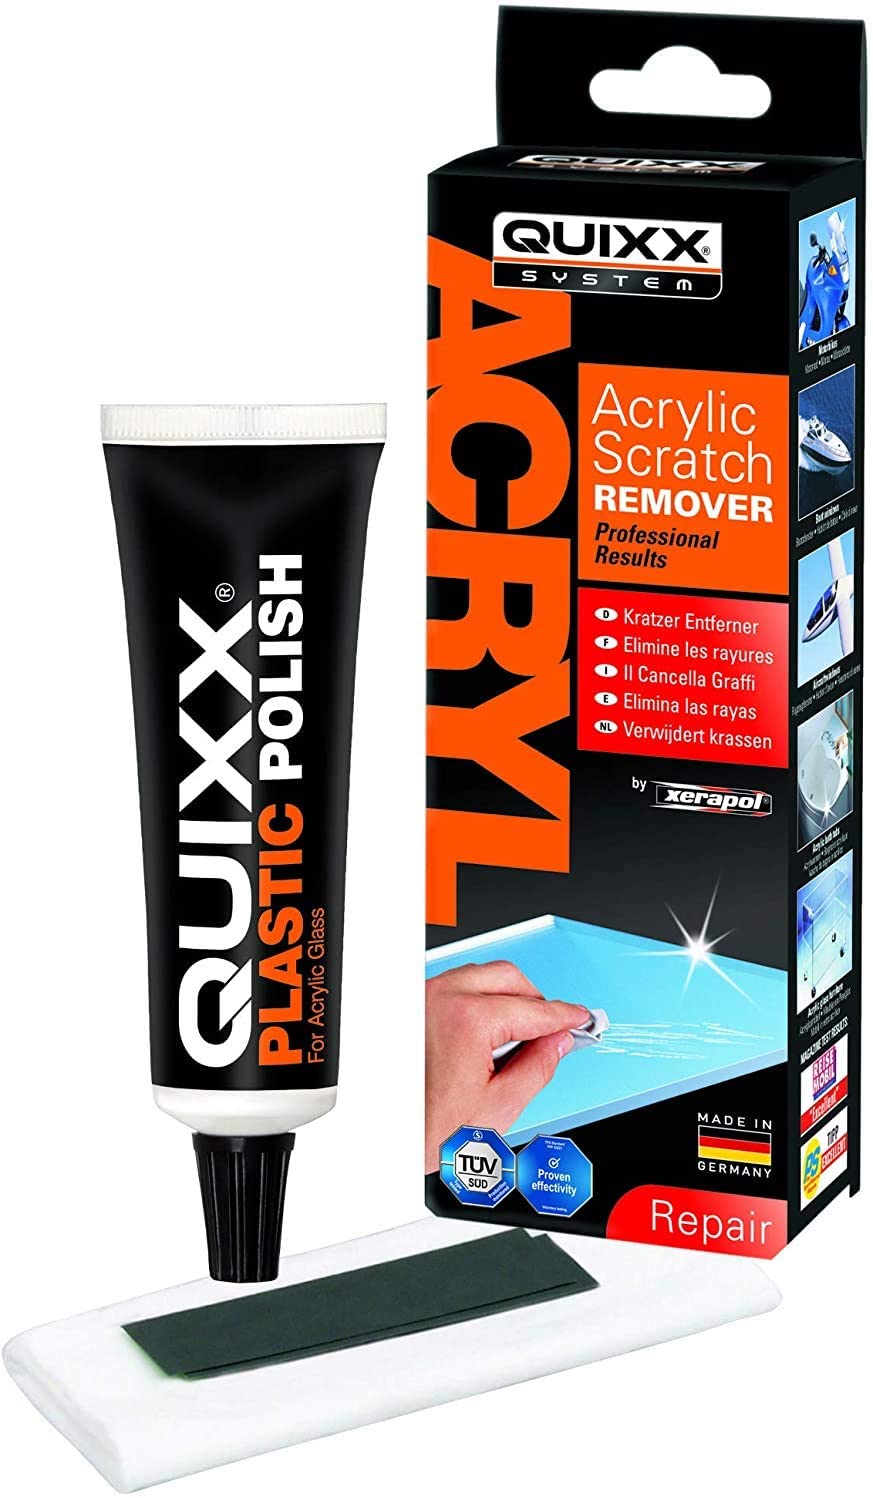 QUIXX QA1 Reliable Acrylic Surface Scratch Remover for Car Motorcycle  Caravan Boat Furniture Etc. Includes 50g Tube Polish, Polish Cloth and  Special Abrasive Papers, TÜV certificate, Also for Deeper Scratches –  BigaMart